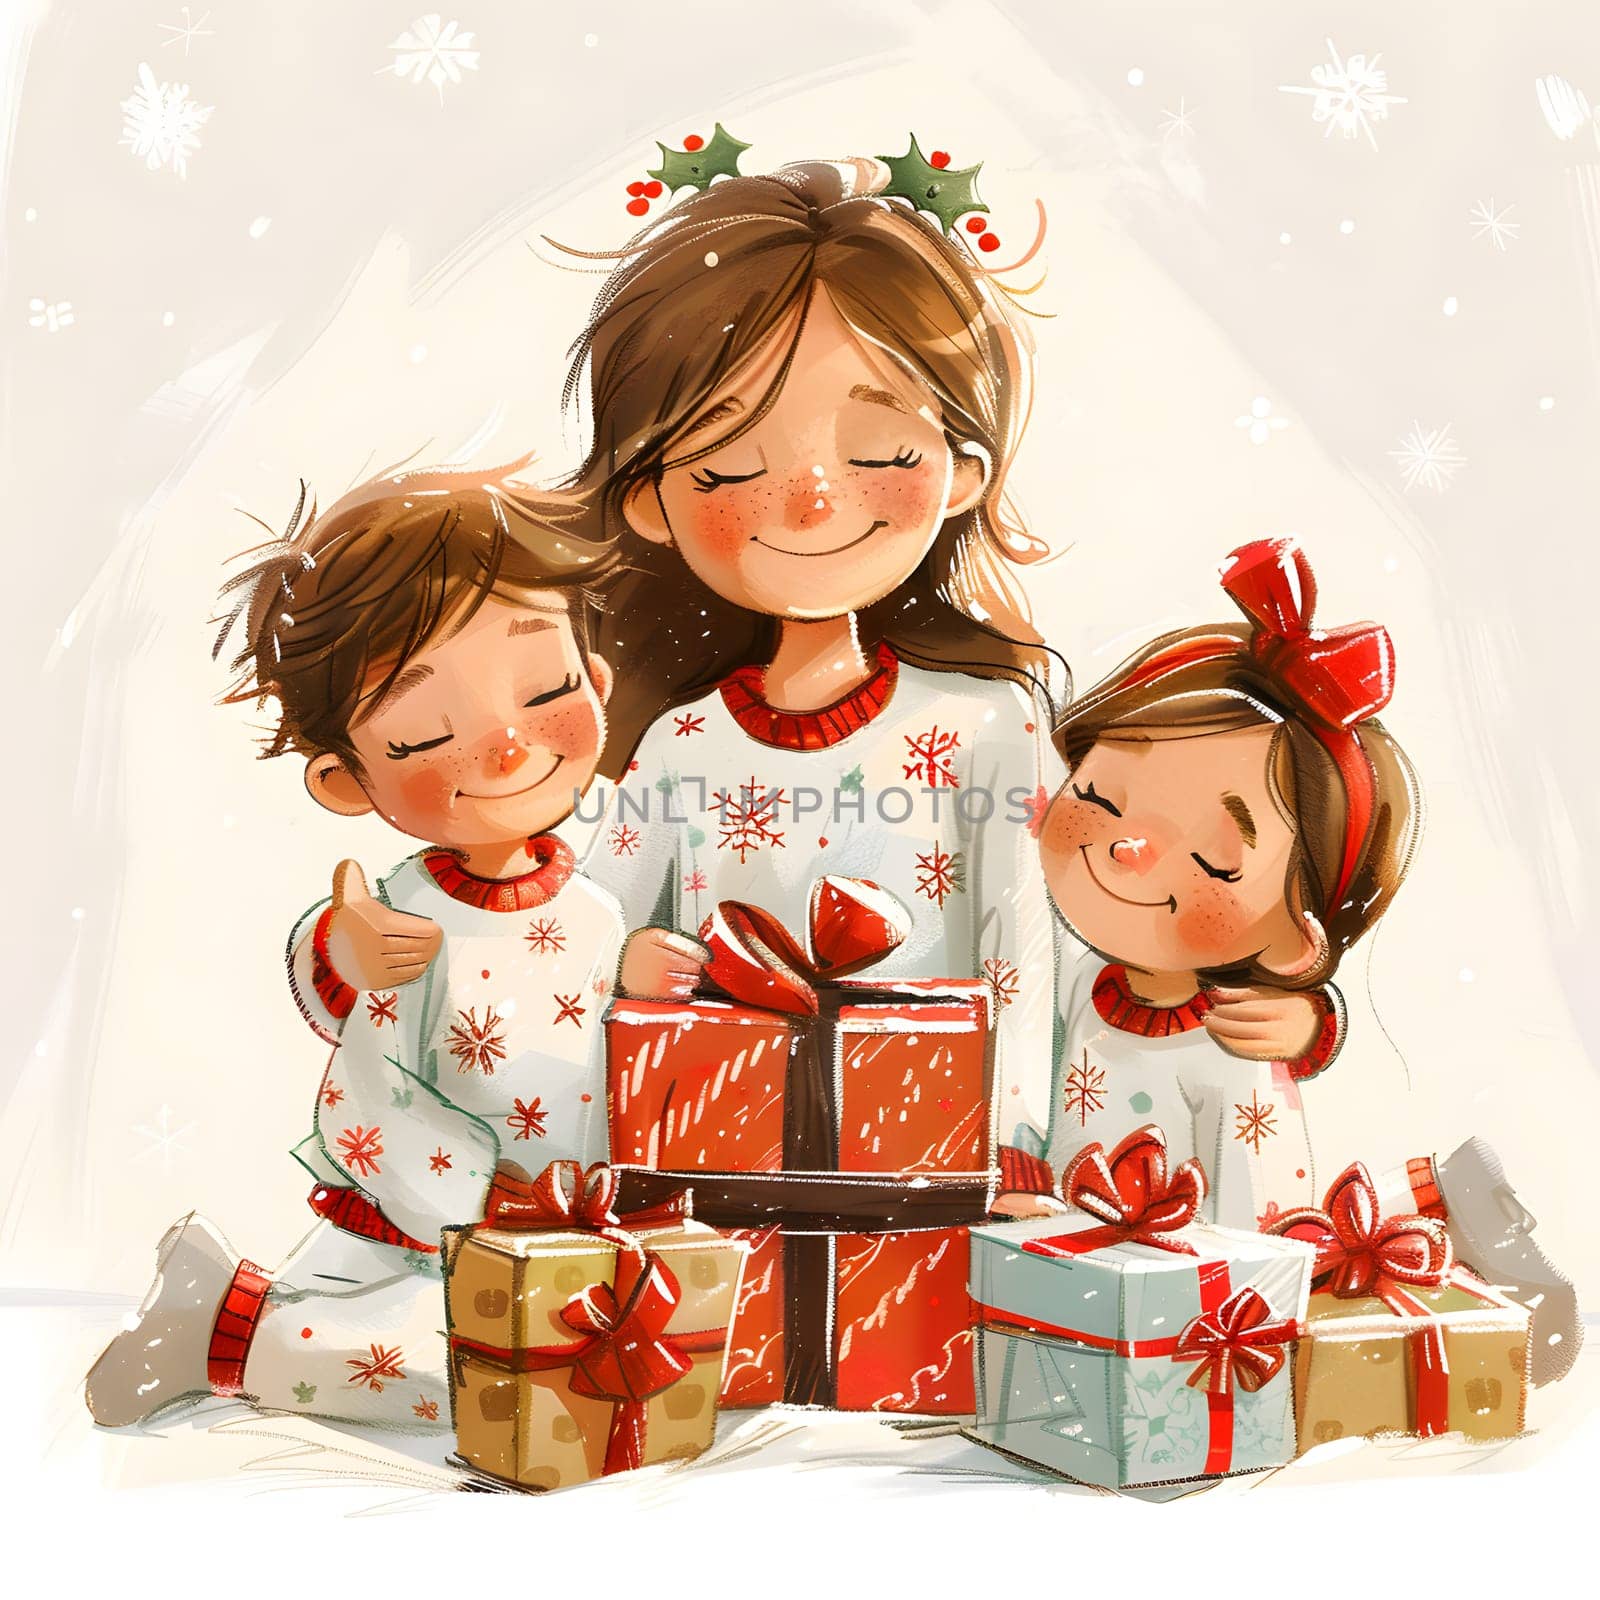 Smiling woman and two happy children surrounded by Christmas presents by Nadtochiy